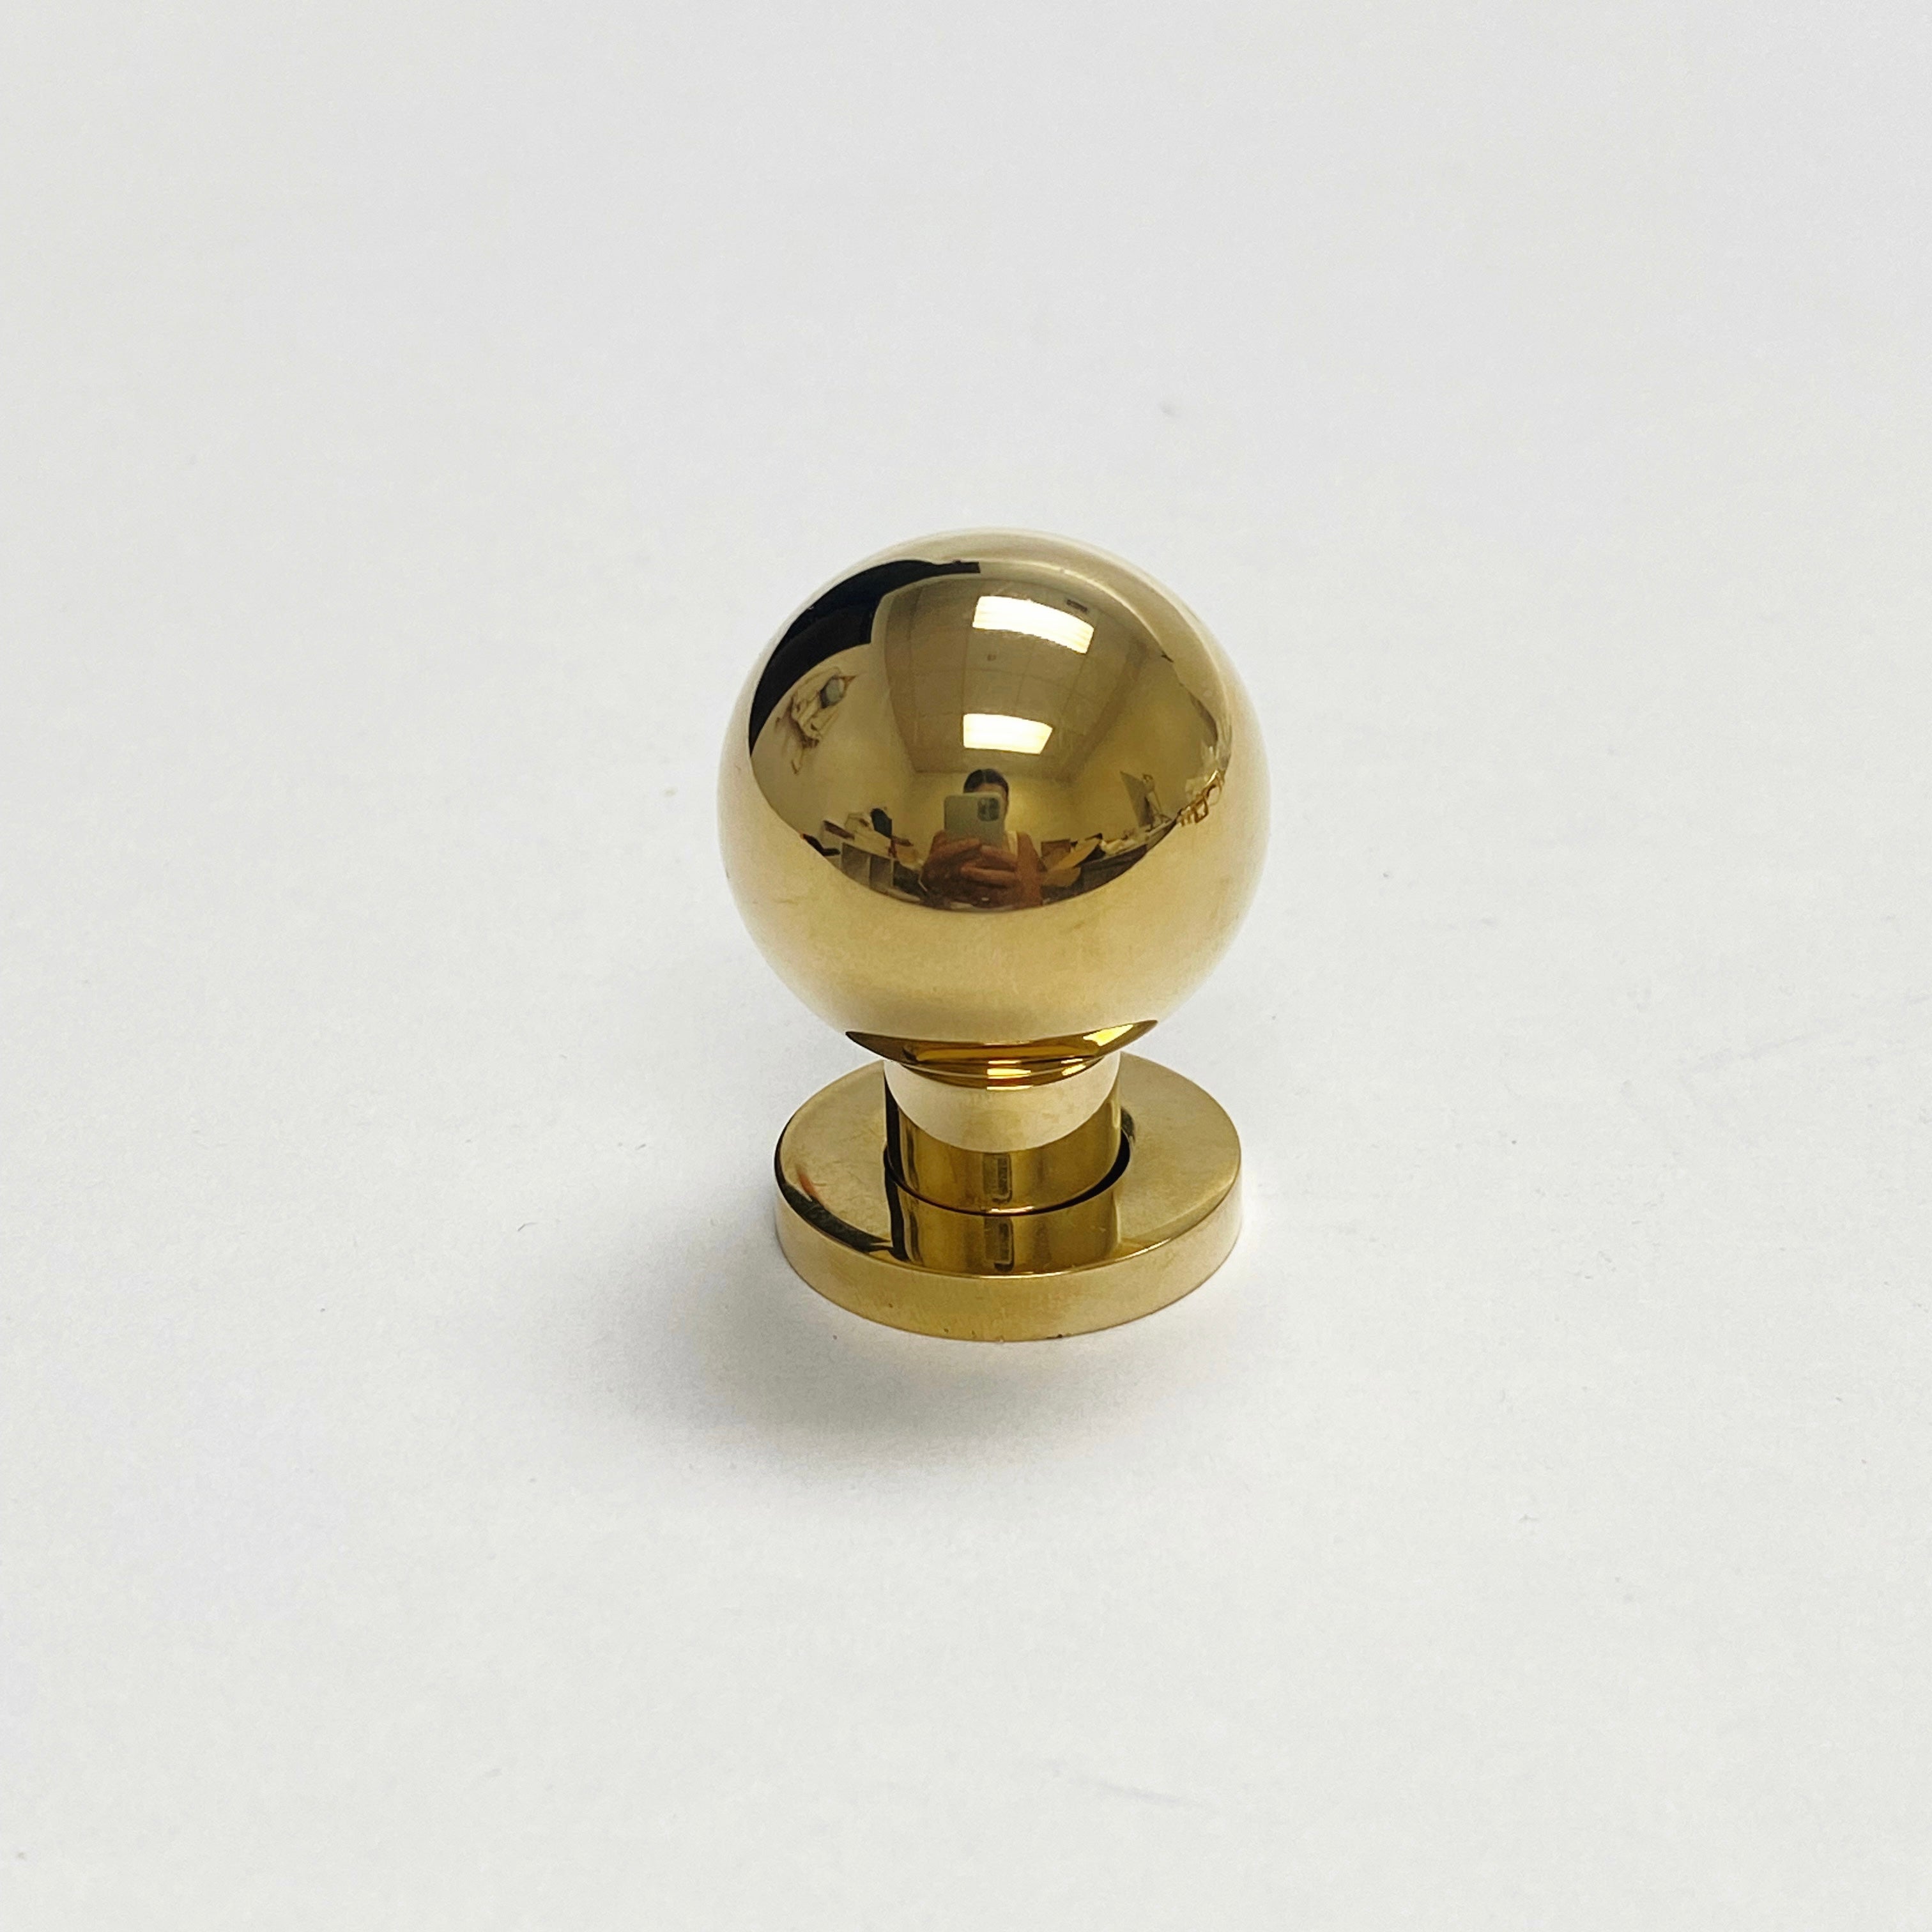 Omni Cabinet Knobs and Drawer Pulls in Unlacquered Brass - Industry Hardware